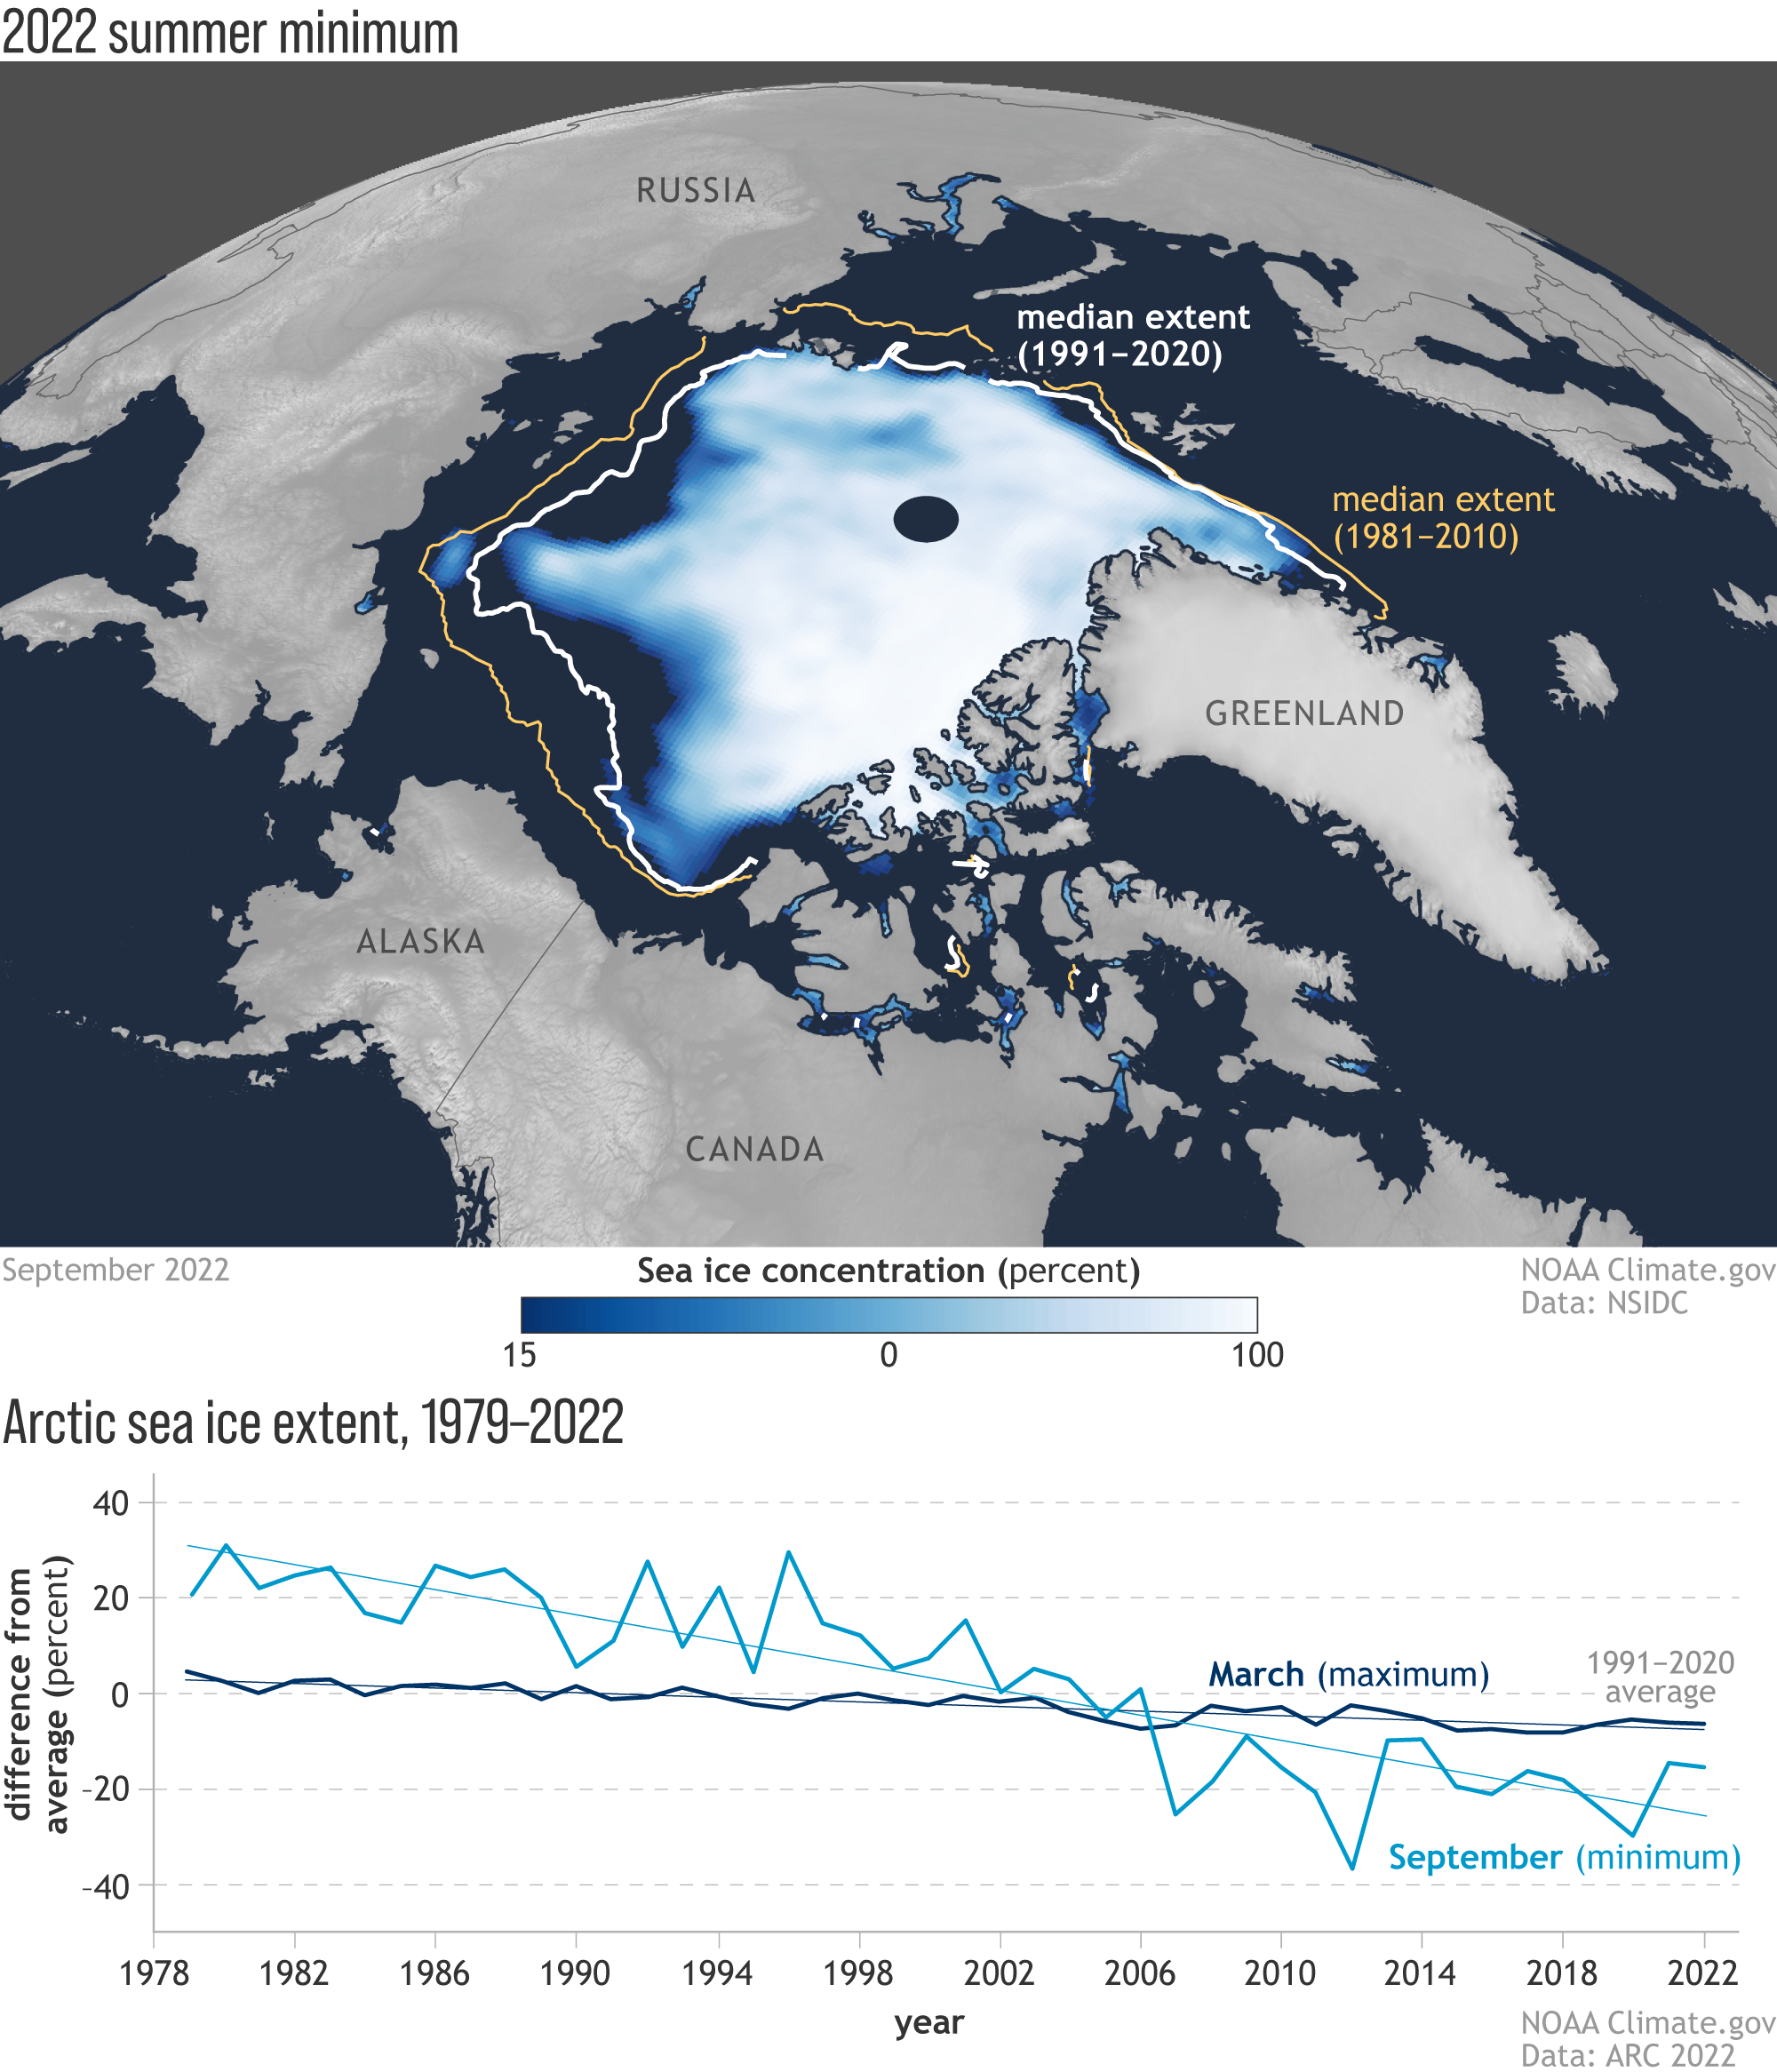 End-of-summer sea ice concentration across the Arctic in September 2022.